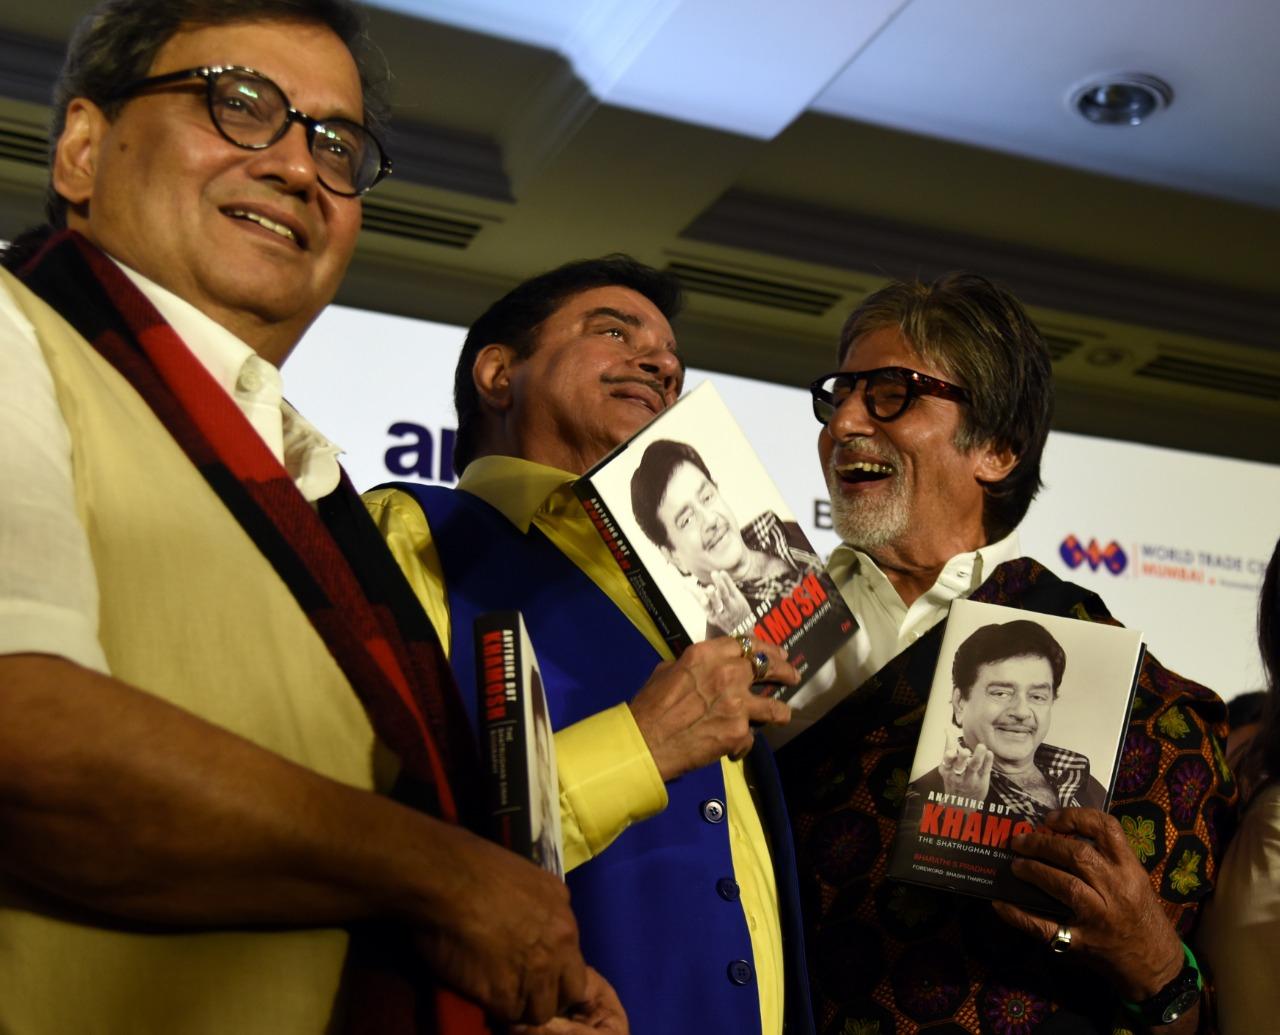 At the book launch of Shatrughan Sinha's autobiography, Amitabh Bachchan shares a light-hearted moment with the actor on stage. Seen in the frame is also director Subhash Ghai